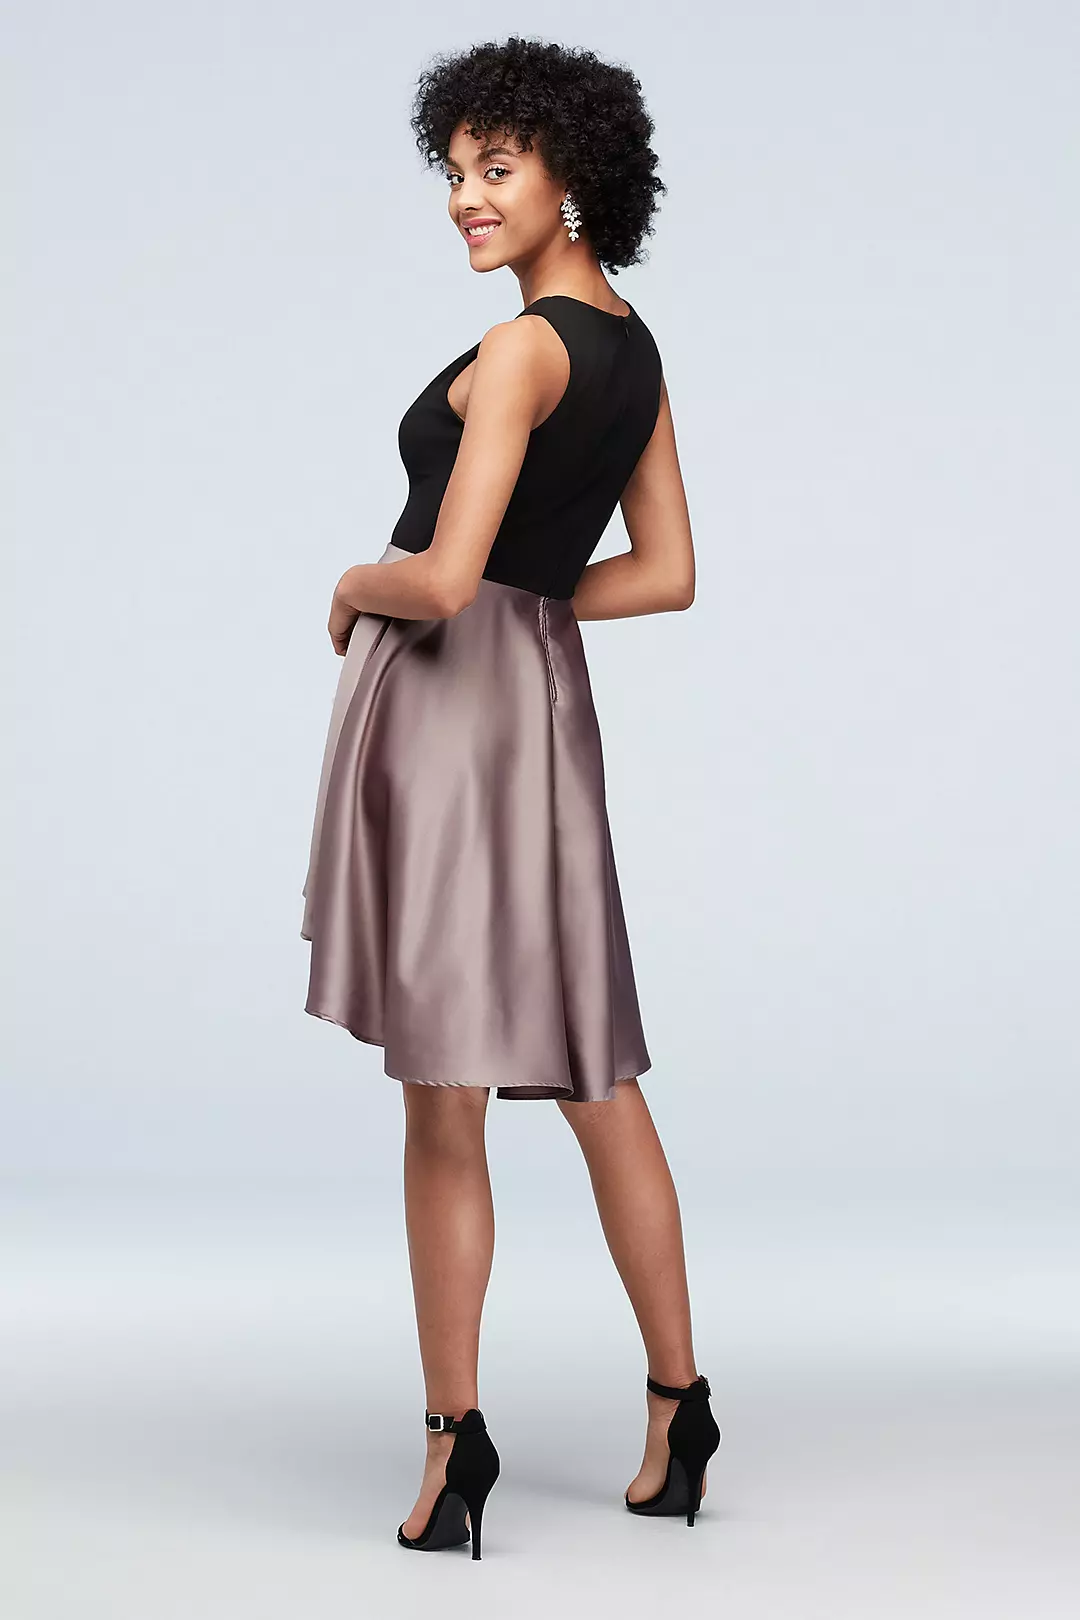 Scallop V-Neck and Satin Skirt High-Low Mini Dress Image 2